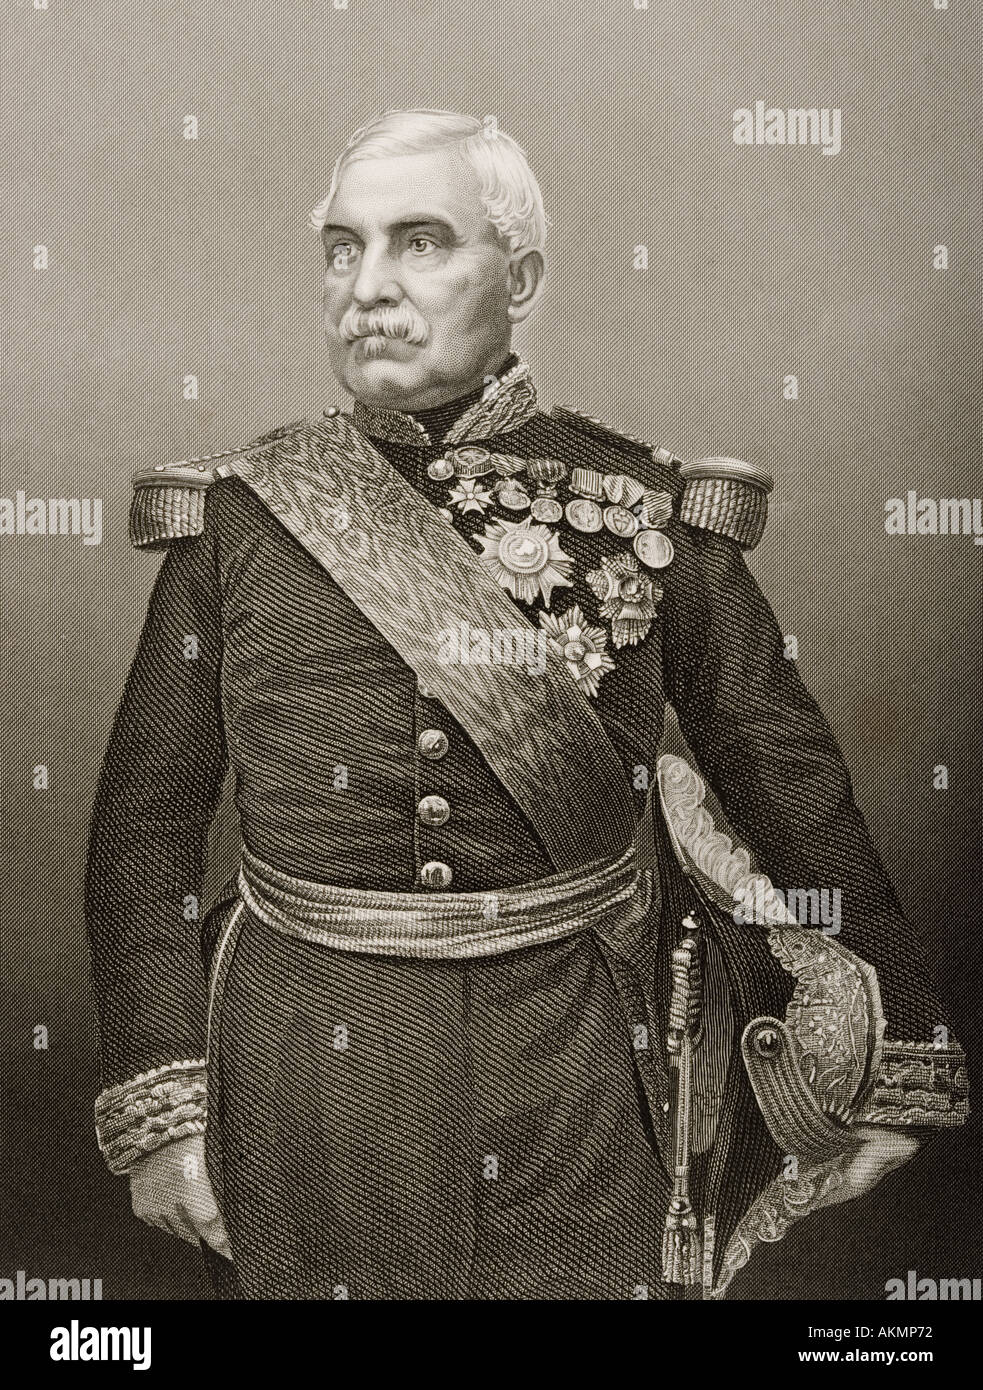 Aimable-Jean-Jacques Pélissier, 1st Duc de Malakoff, 1794 – 1864.  Marshal of France. Stock Photo